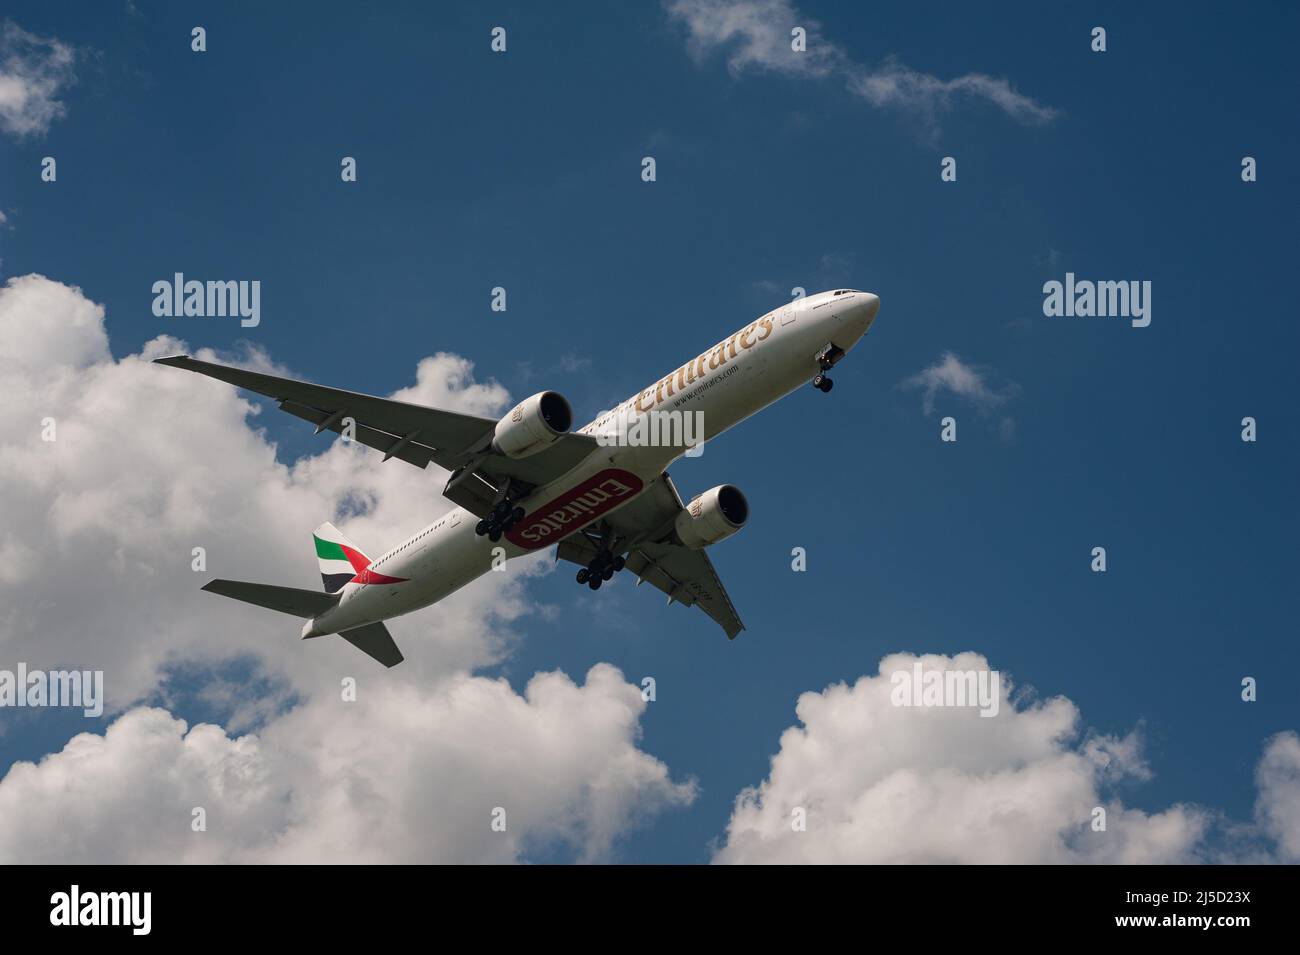 Jun. 23, 2021, Singapore, Republic of Singapore, Asia - An Emirates Airline Boeing 777-300 ER passenger aircraft with registration A6-EPP on approach to Changi International Airport during the ongoing Corona crisis. [automated translation] Stock Photo